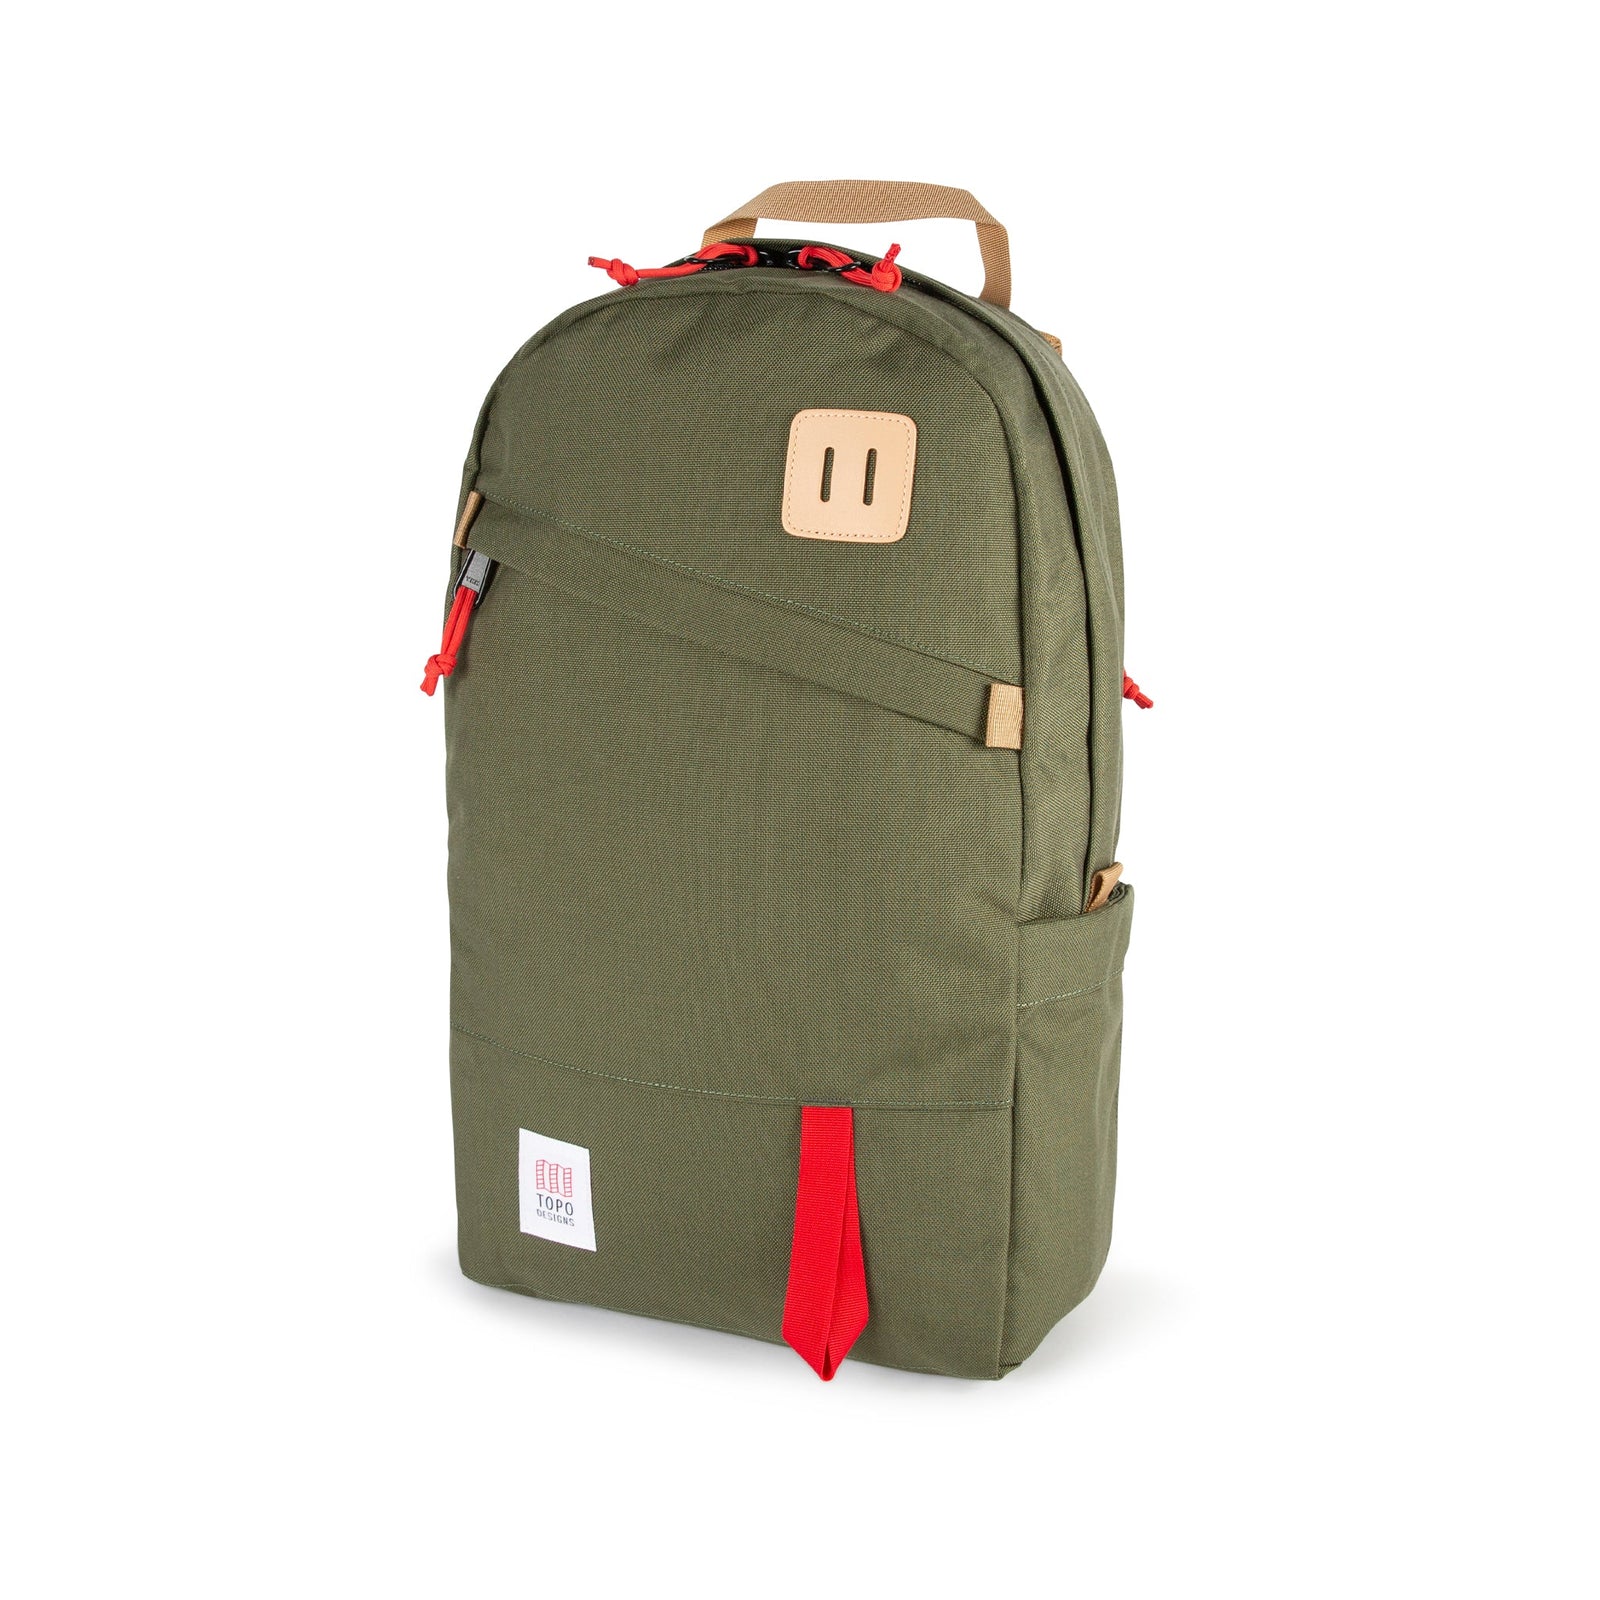 Topo Designs Daypack Classic 100% recycled nylon laptop backpack for work or school in "Olive" green.